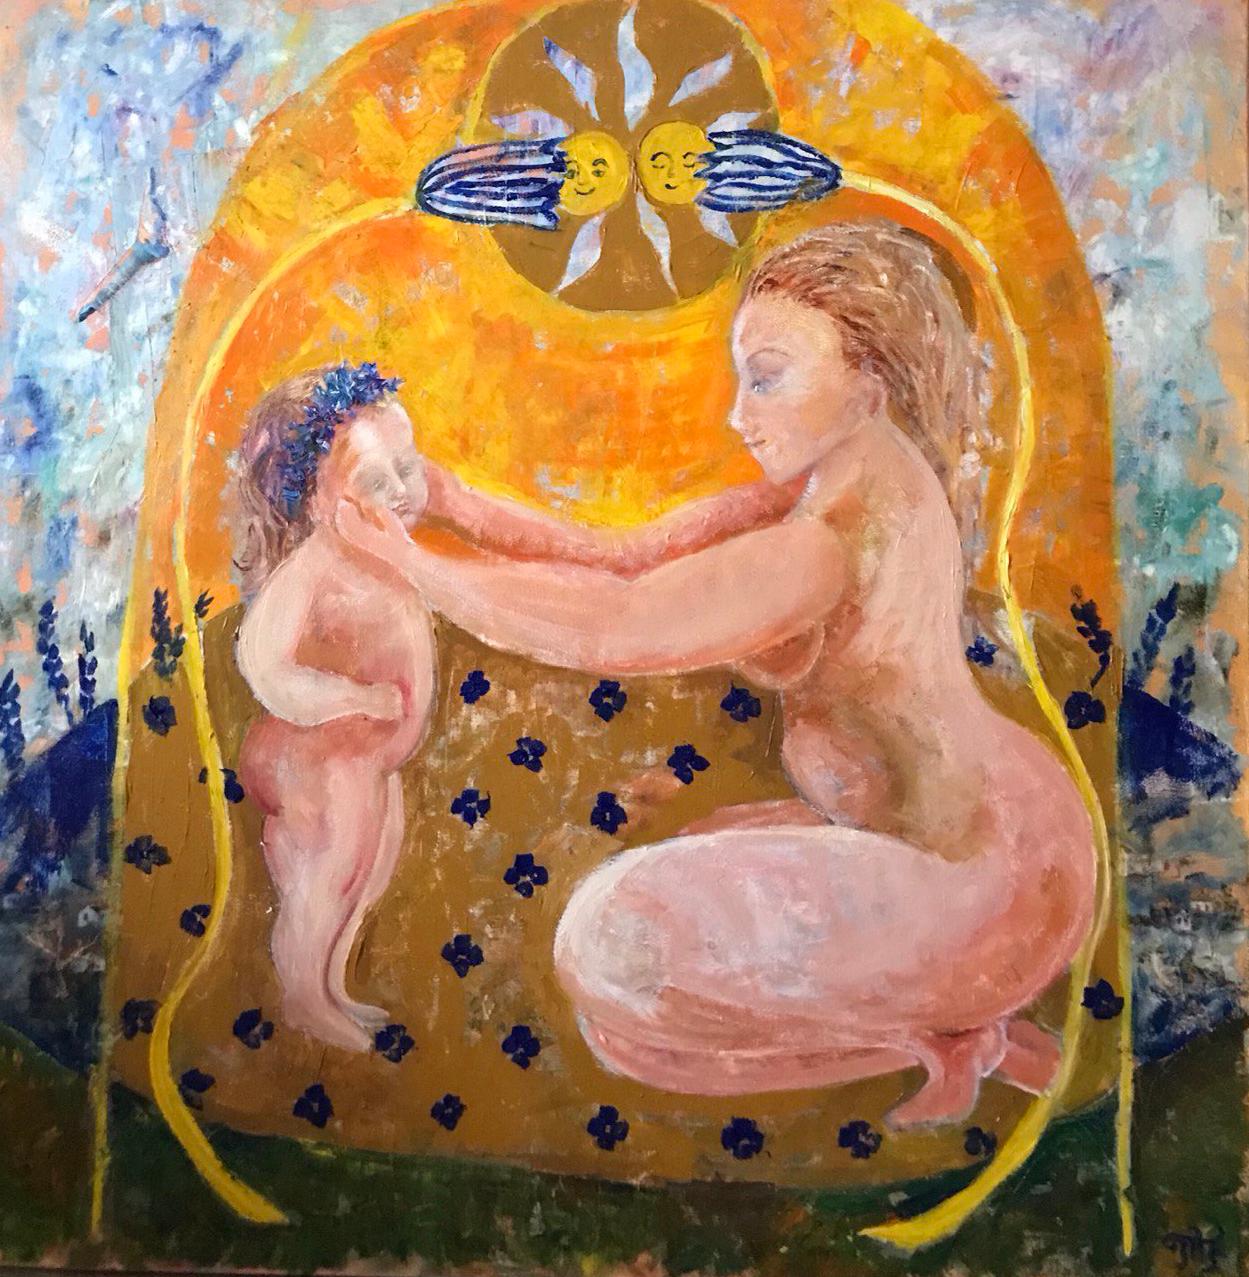 In the artwork titled "You Are My Universe," a profound narrative unfolds within the realm of the "Self-Perception" series. This painting encapsulates a poignant moment shared between a mother and her daughter, transcending the boundaries of time